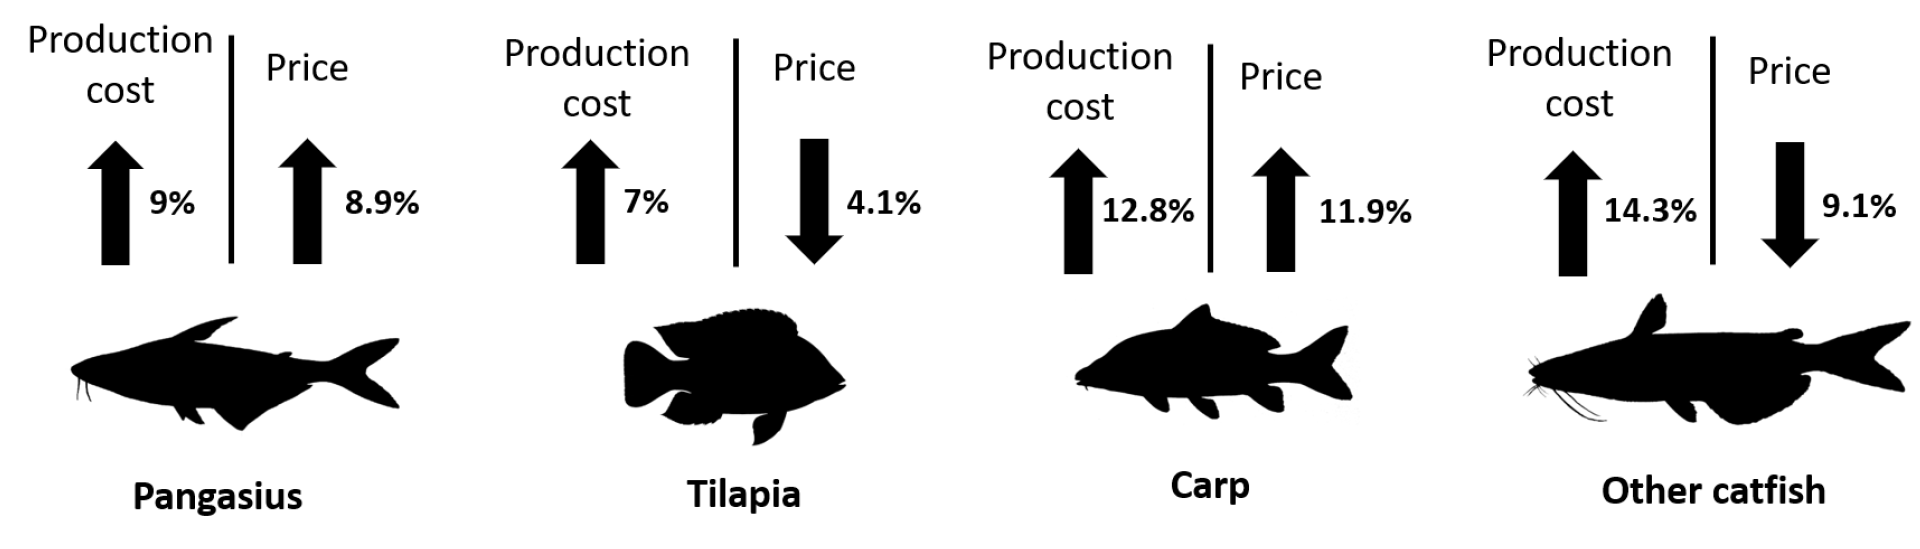 Figure 3: The benefits of the middlemen in the fish value-chain during COVID-19.